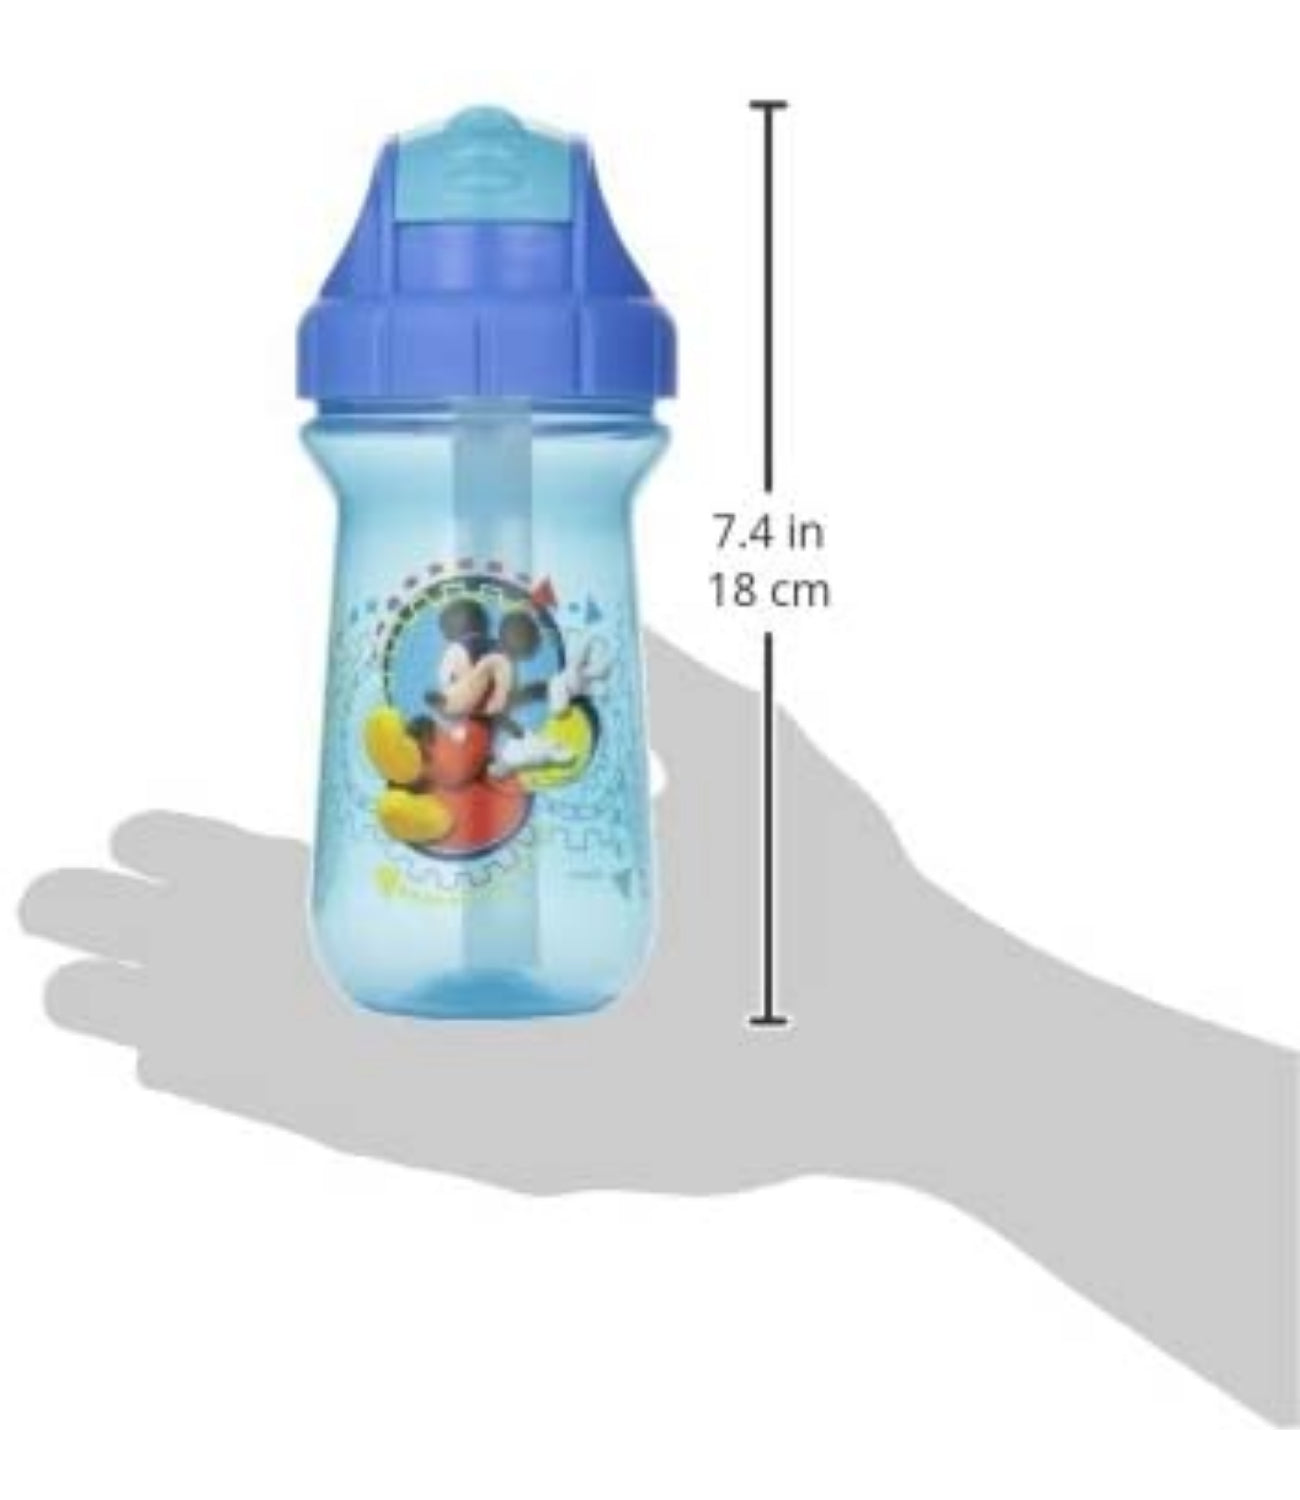 The First Years 10 oz Disney Cars Flip Top Straw Cup